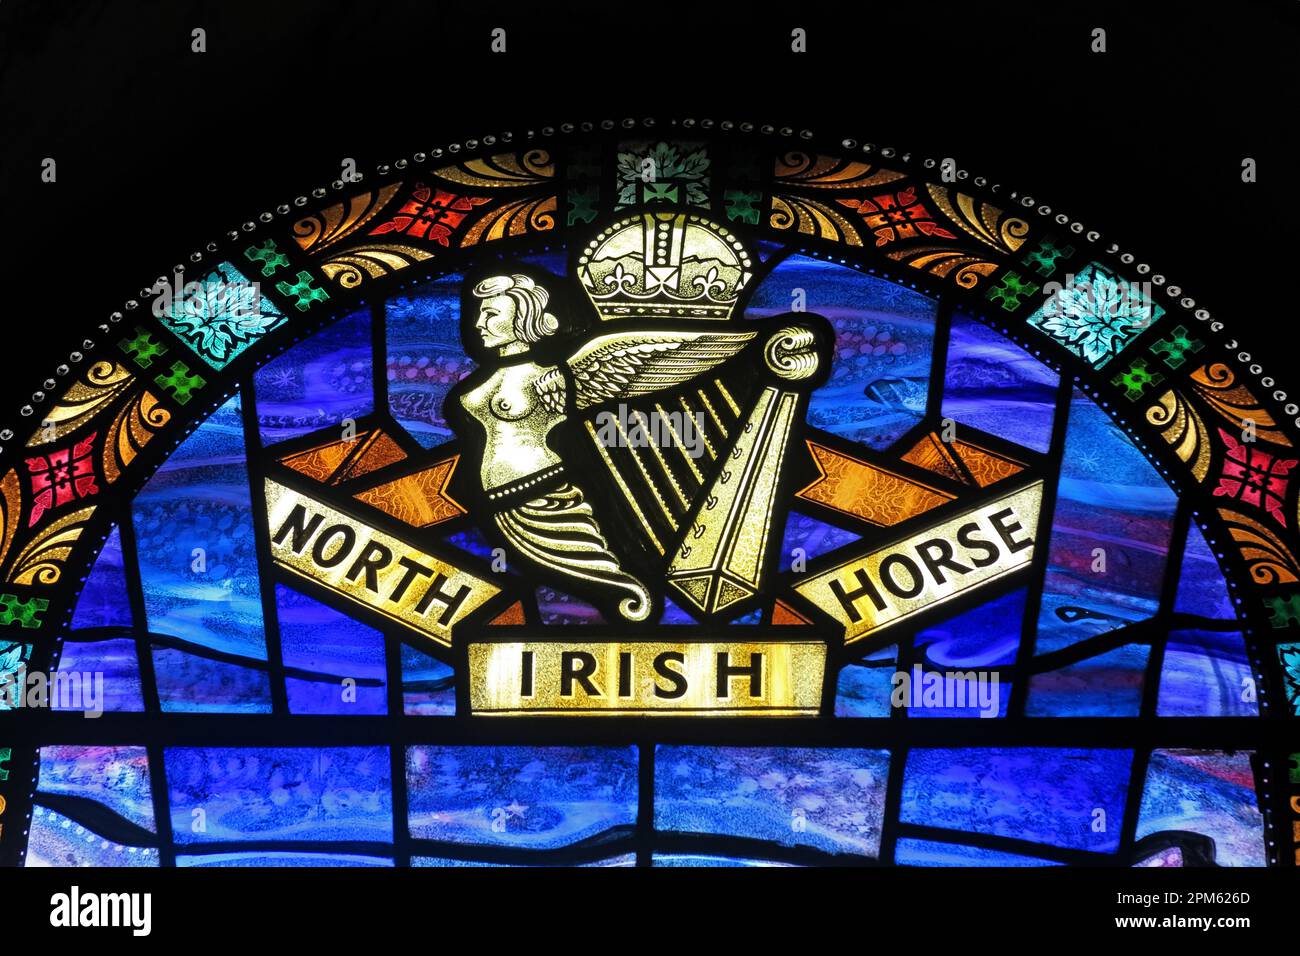 North Irish Horse Regiment, stained glass window, at Belfast City Hall foyer, Donegall Square North, Belfast, Antrim, Northern Ireland, UK,  BT1 5GS Stock Photo